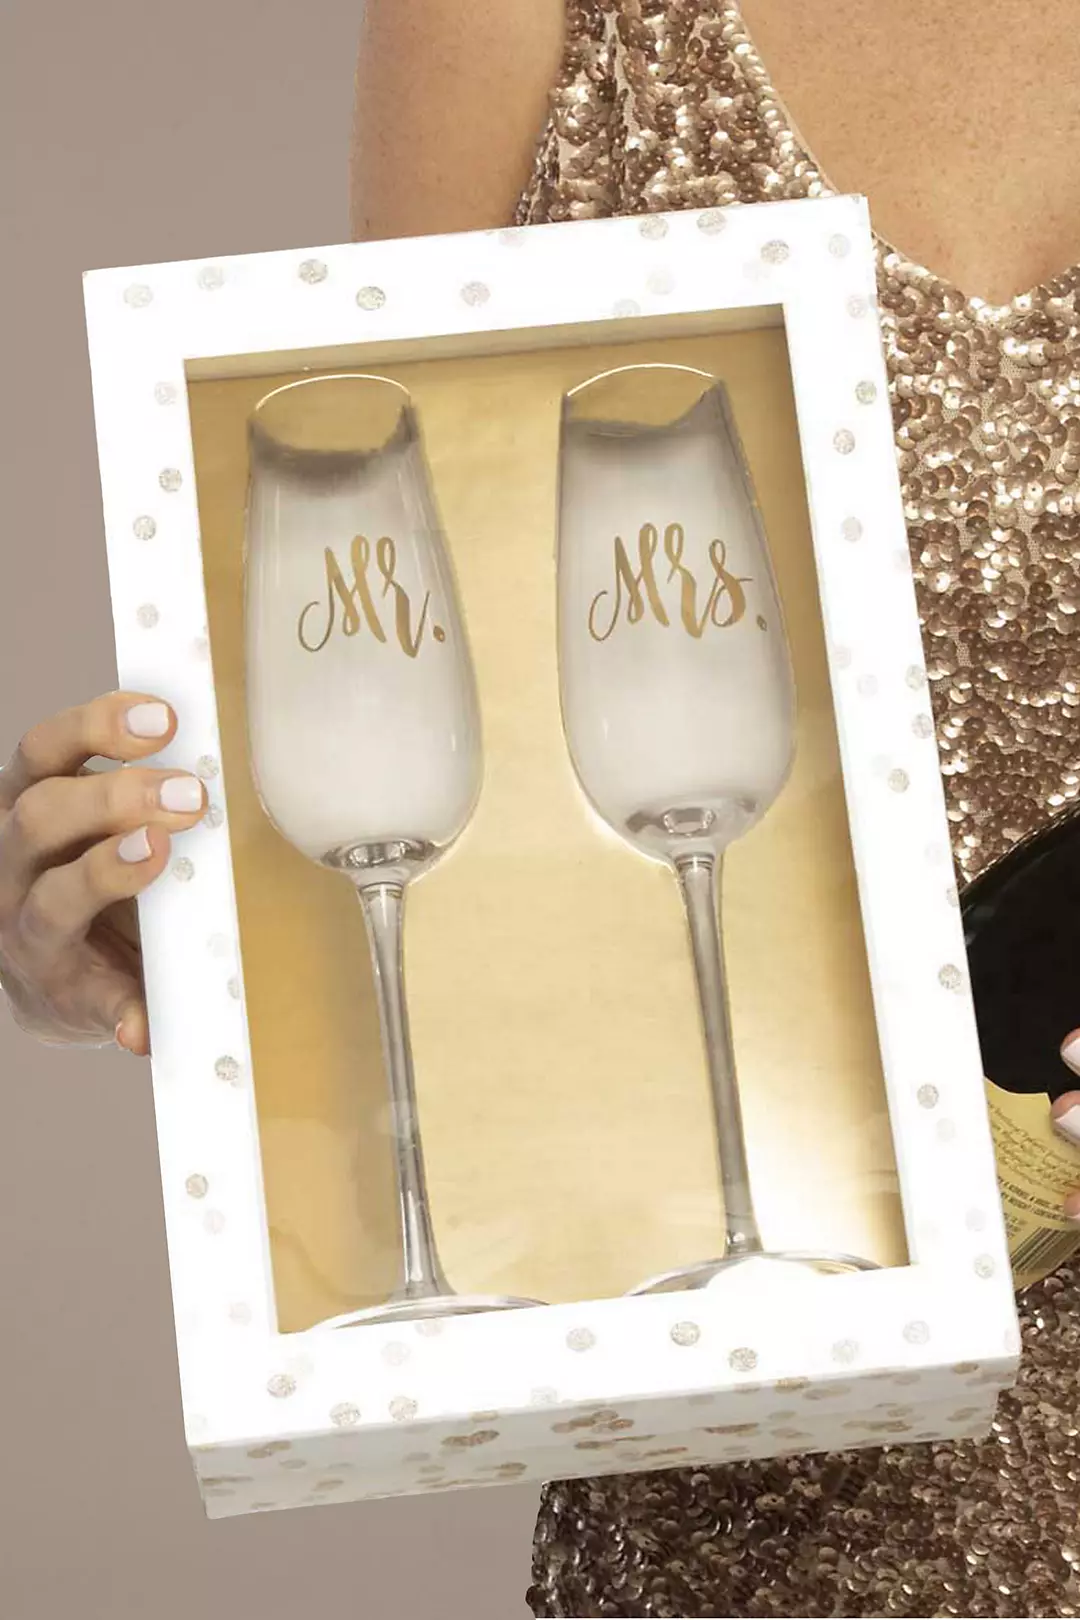 Mr and Mrs Champagne Flutes Image